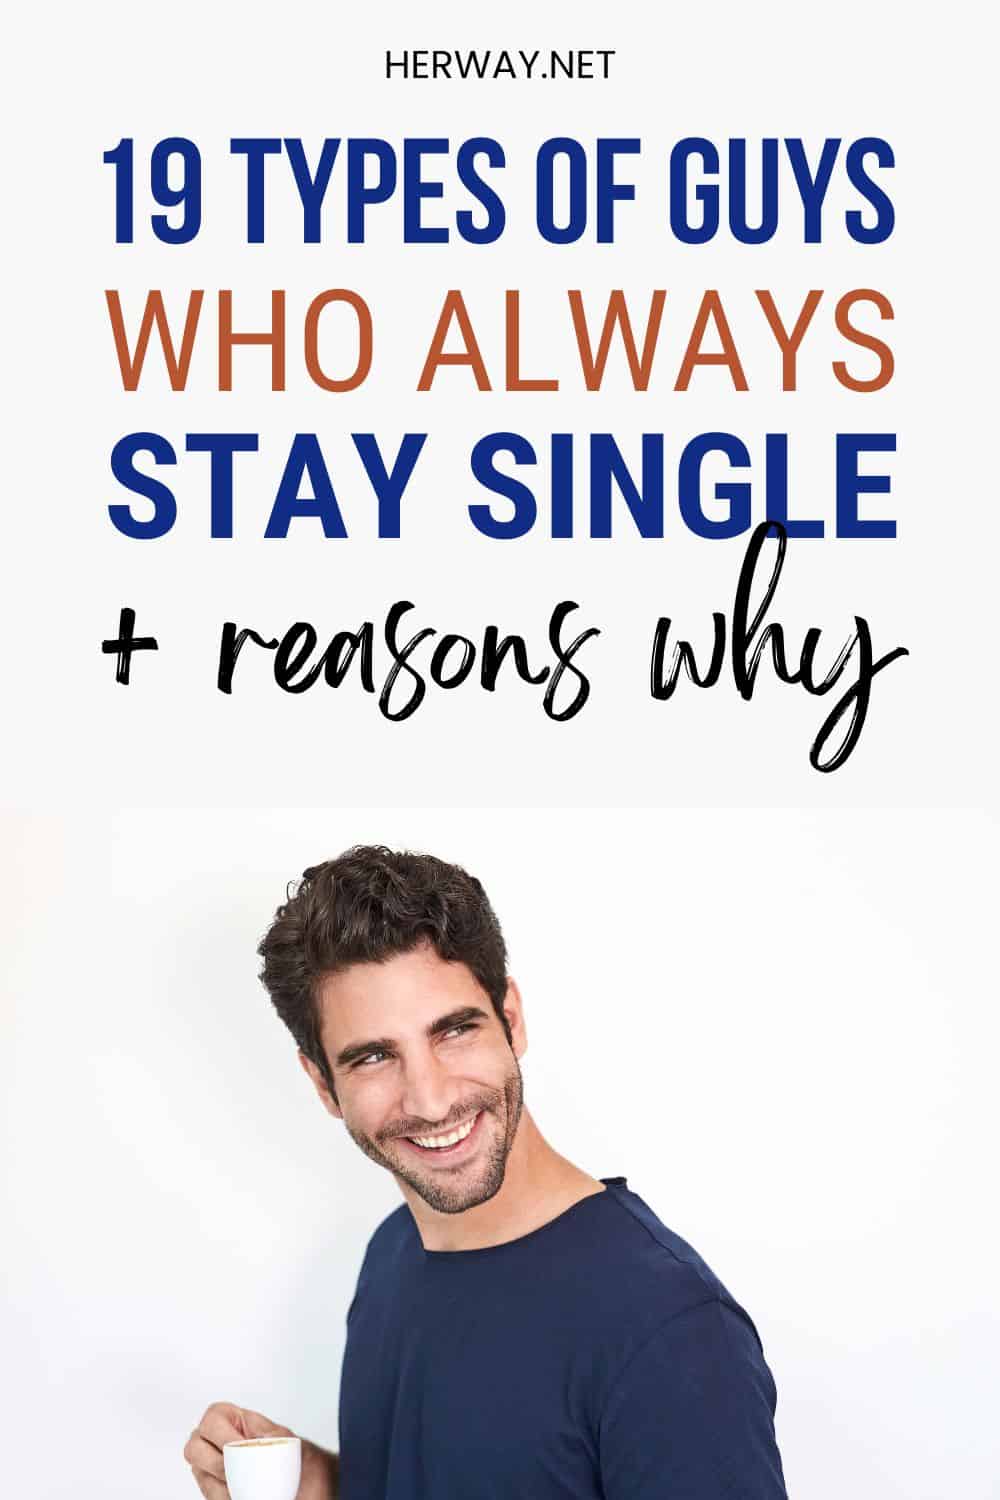 14 Types Of Guys Who Stay Single And Why They Do